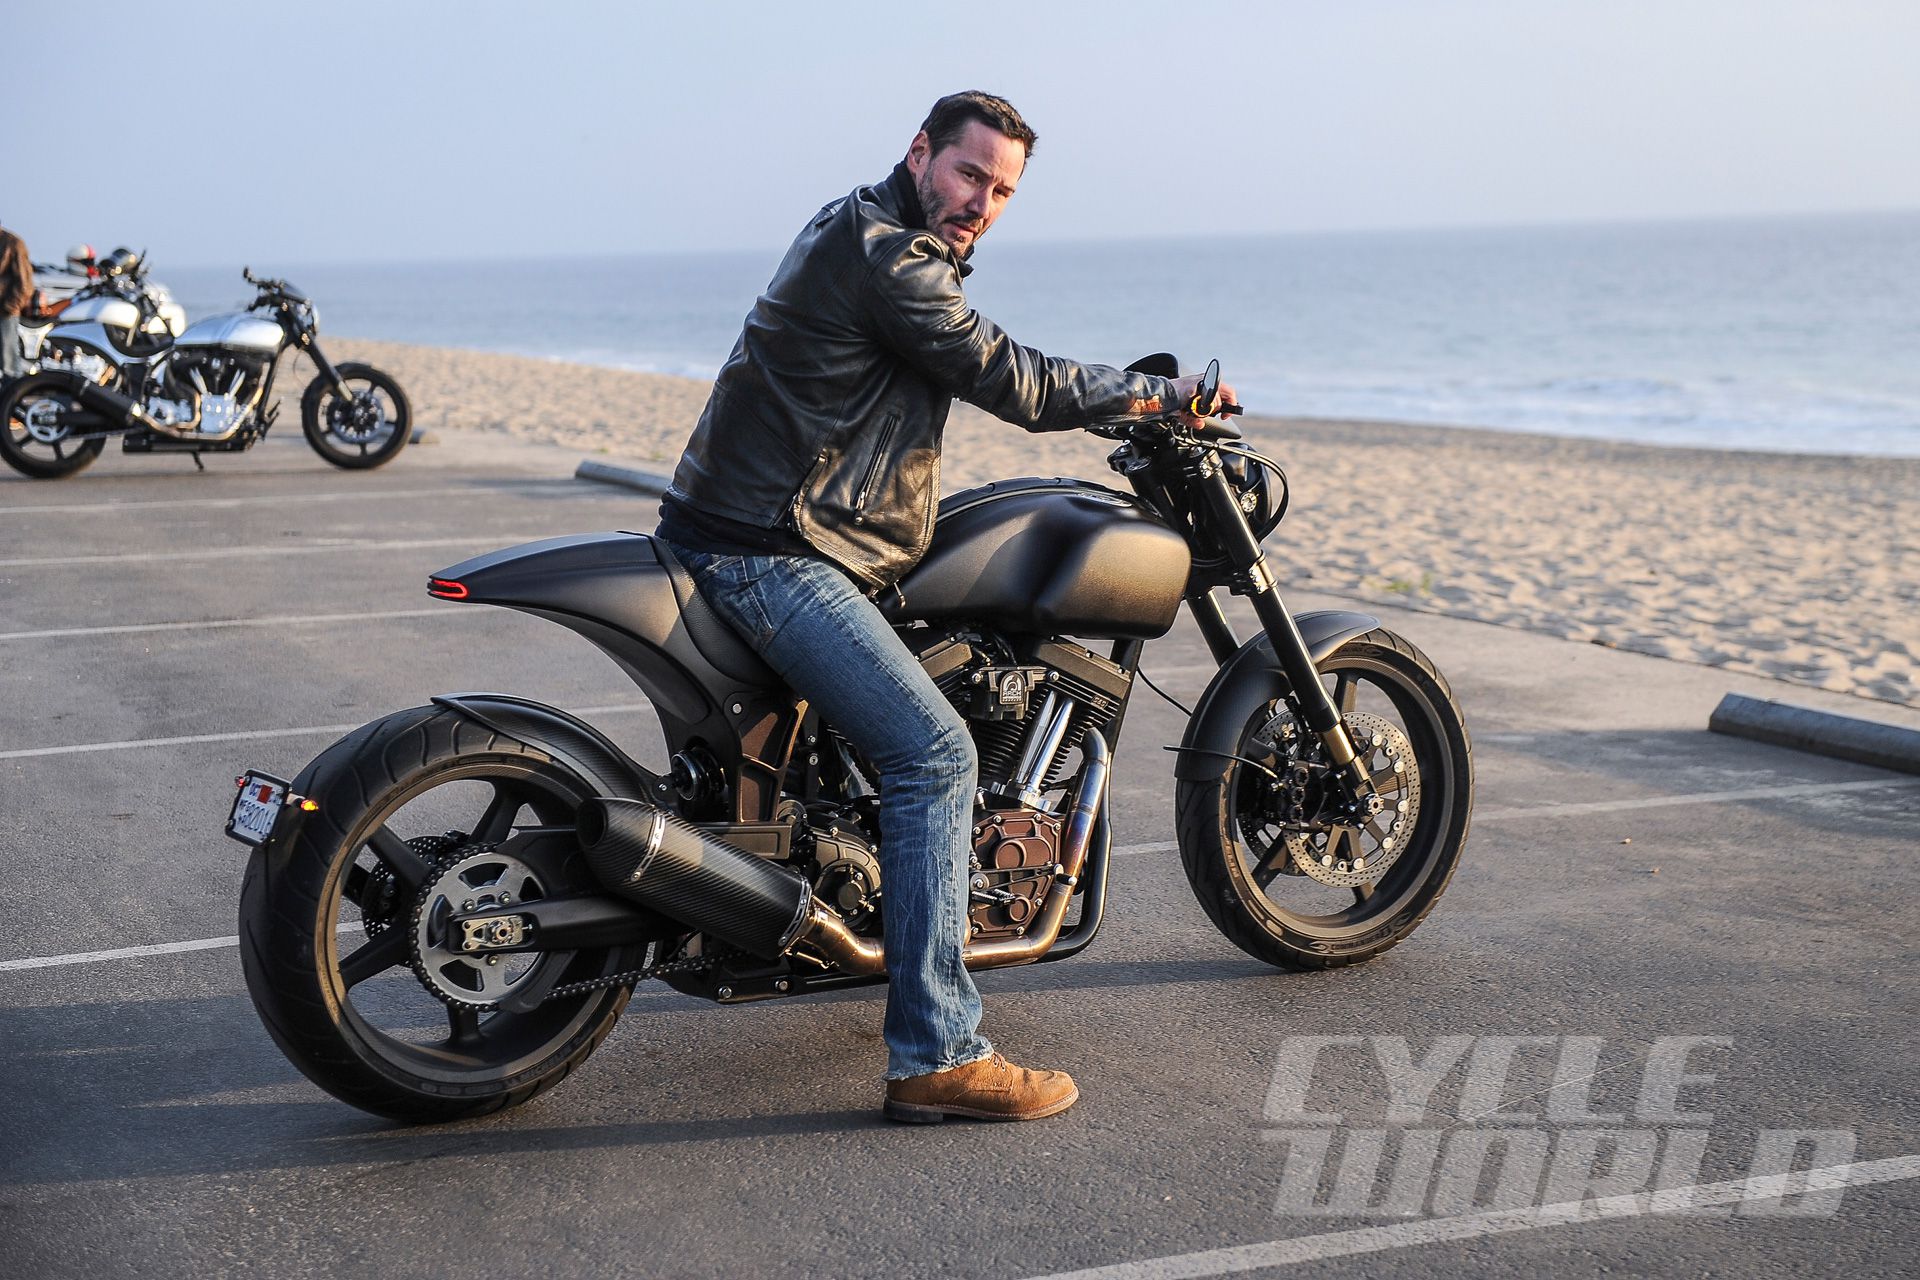 2015 Arch Motorcycle Company Krgt 1 Motorcycle Review Cycle World